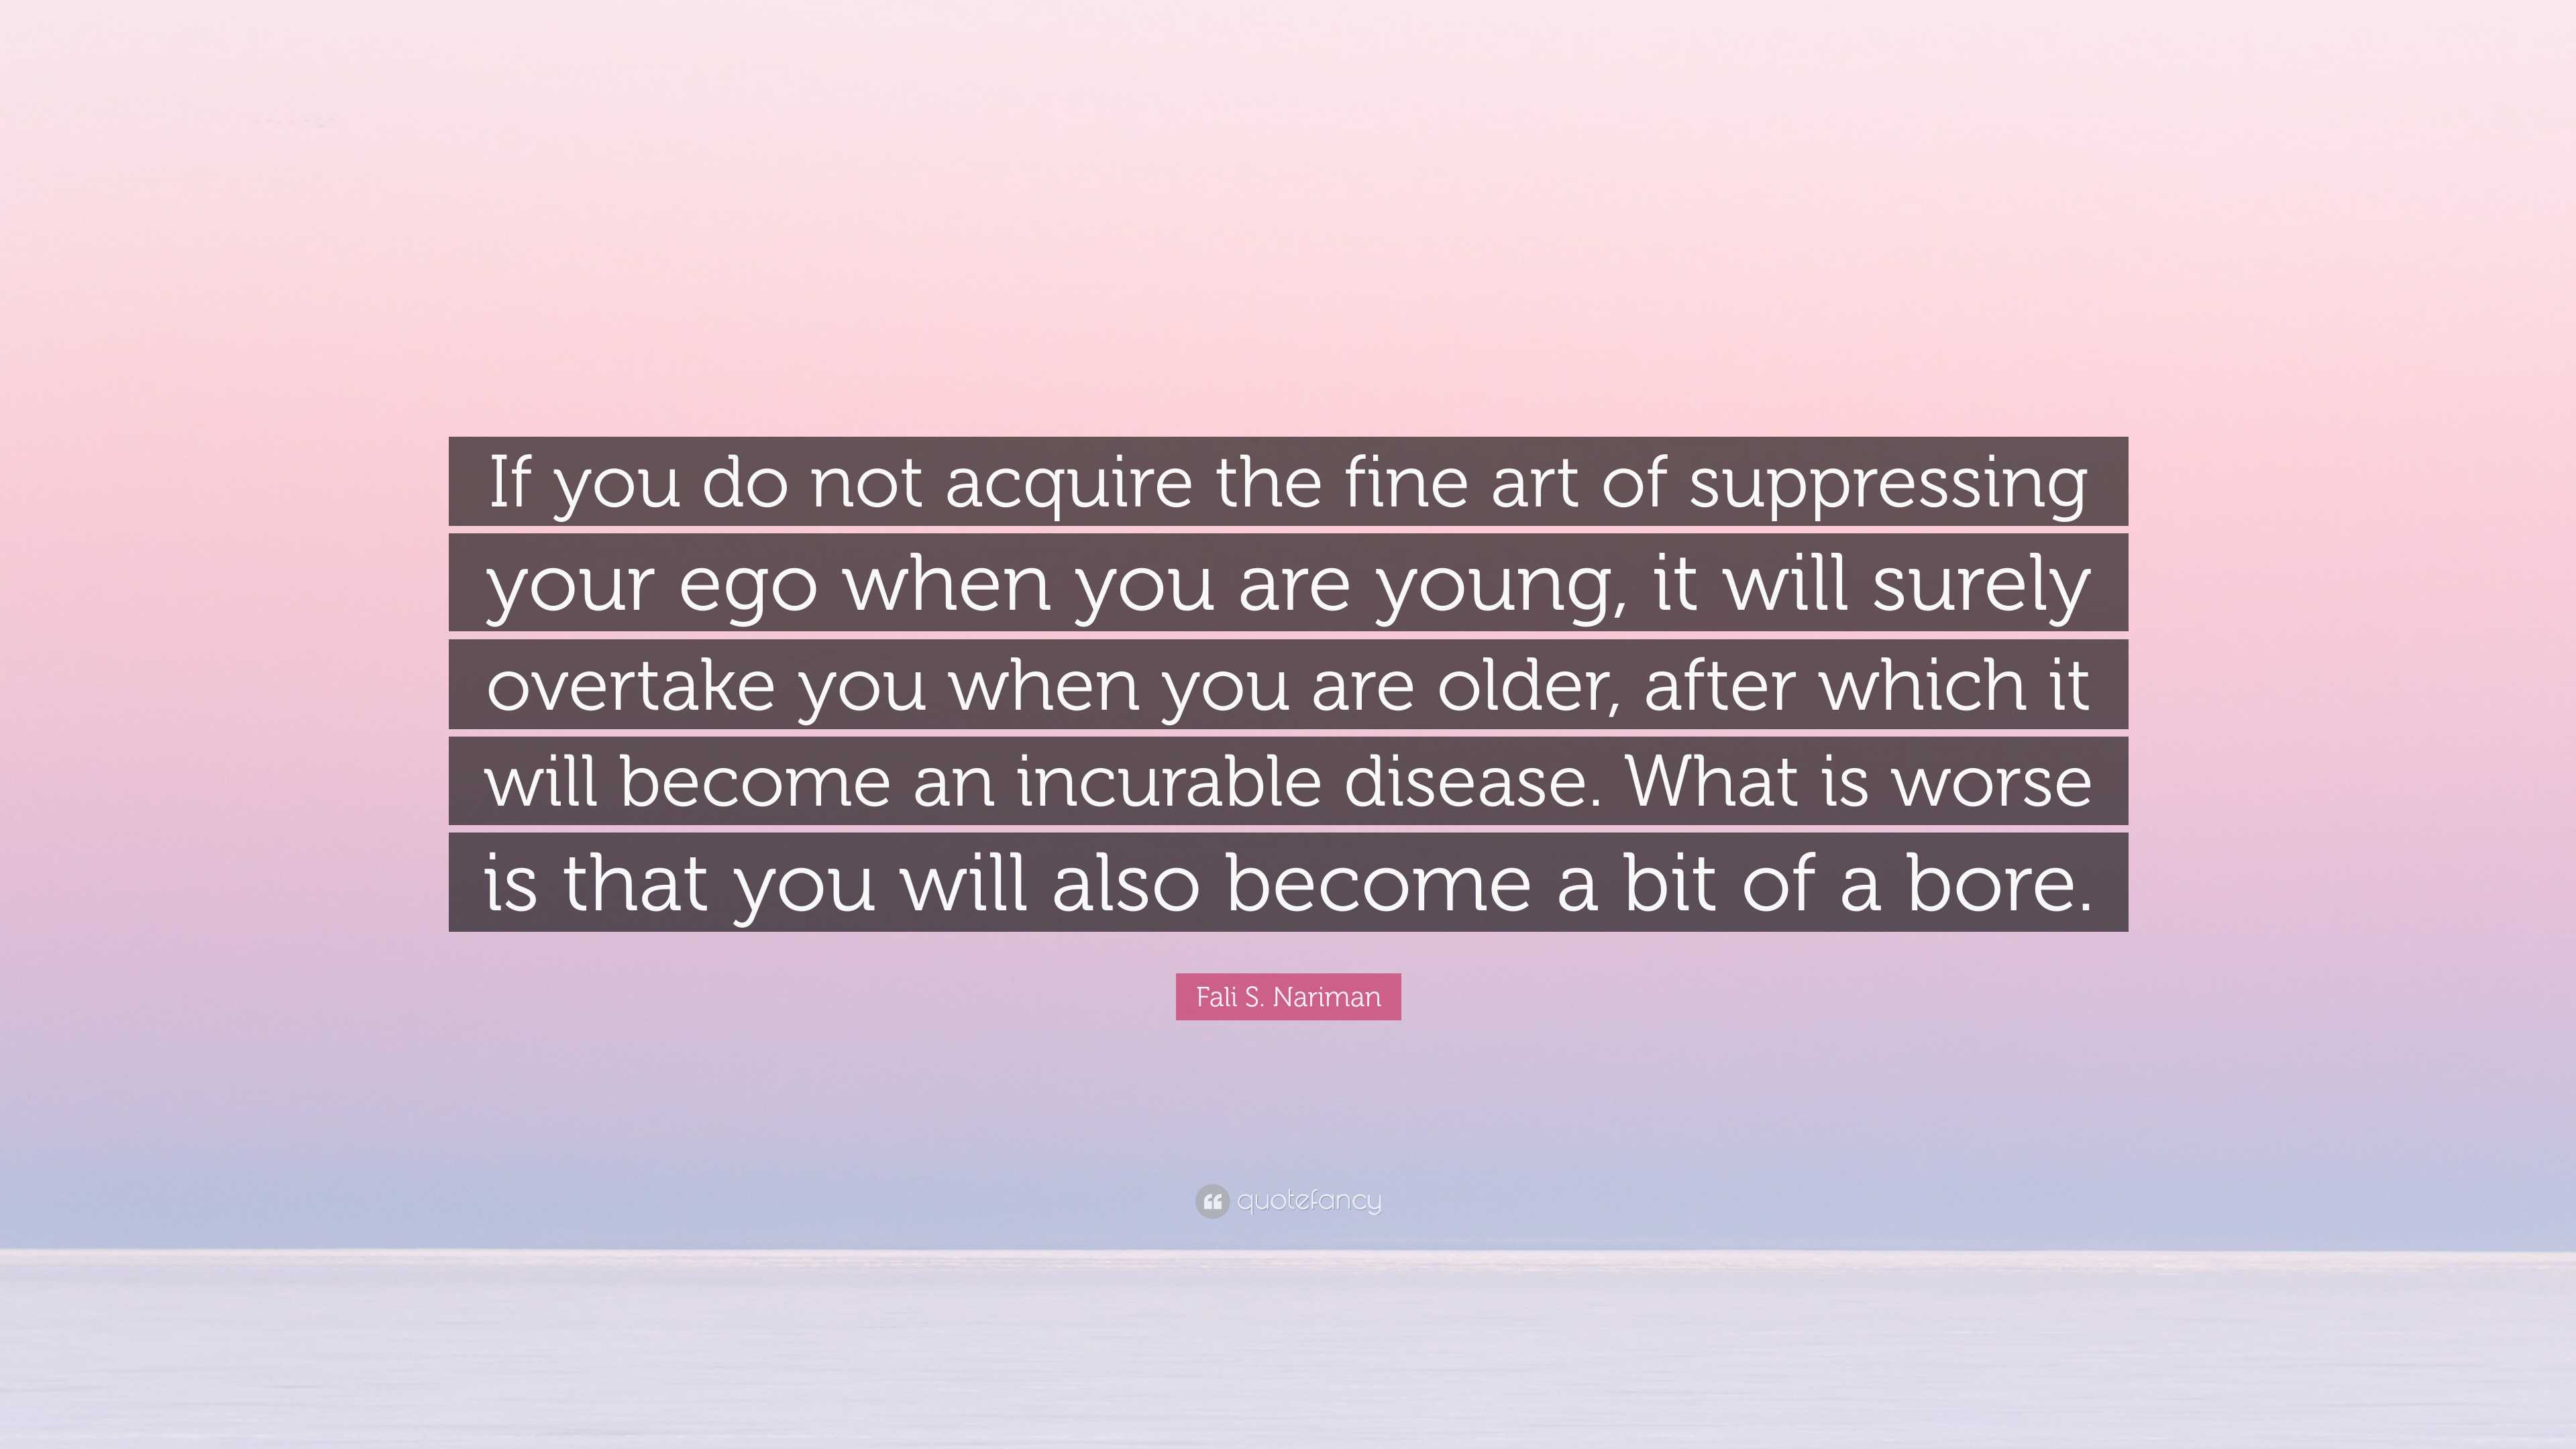 Fali S. Nariman Quote: “If you do not acquire the fine art of ...